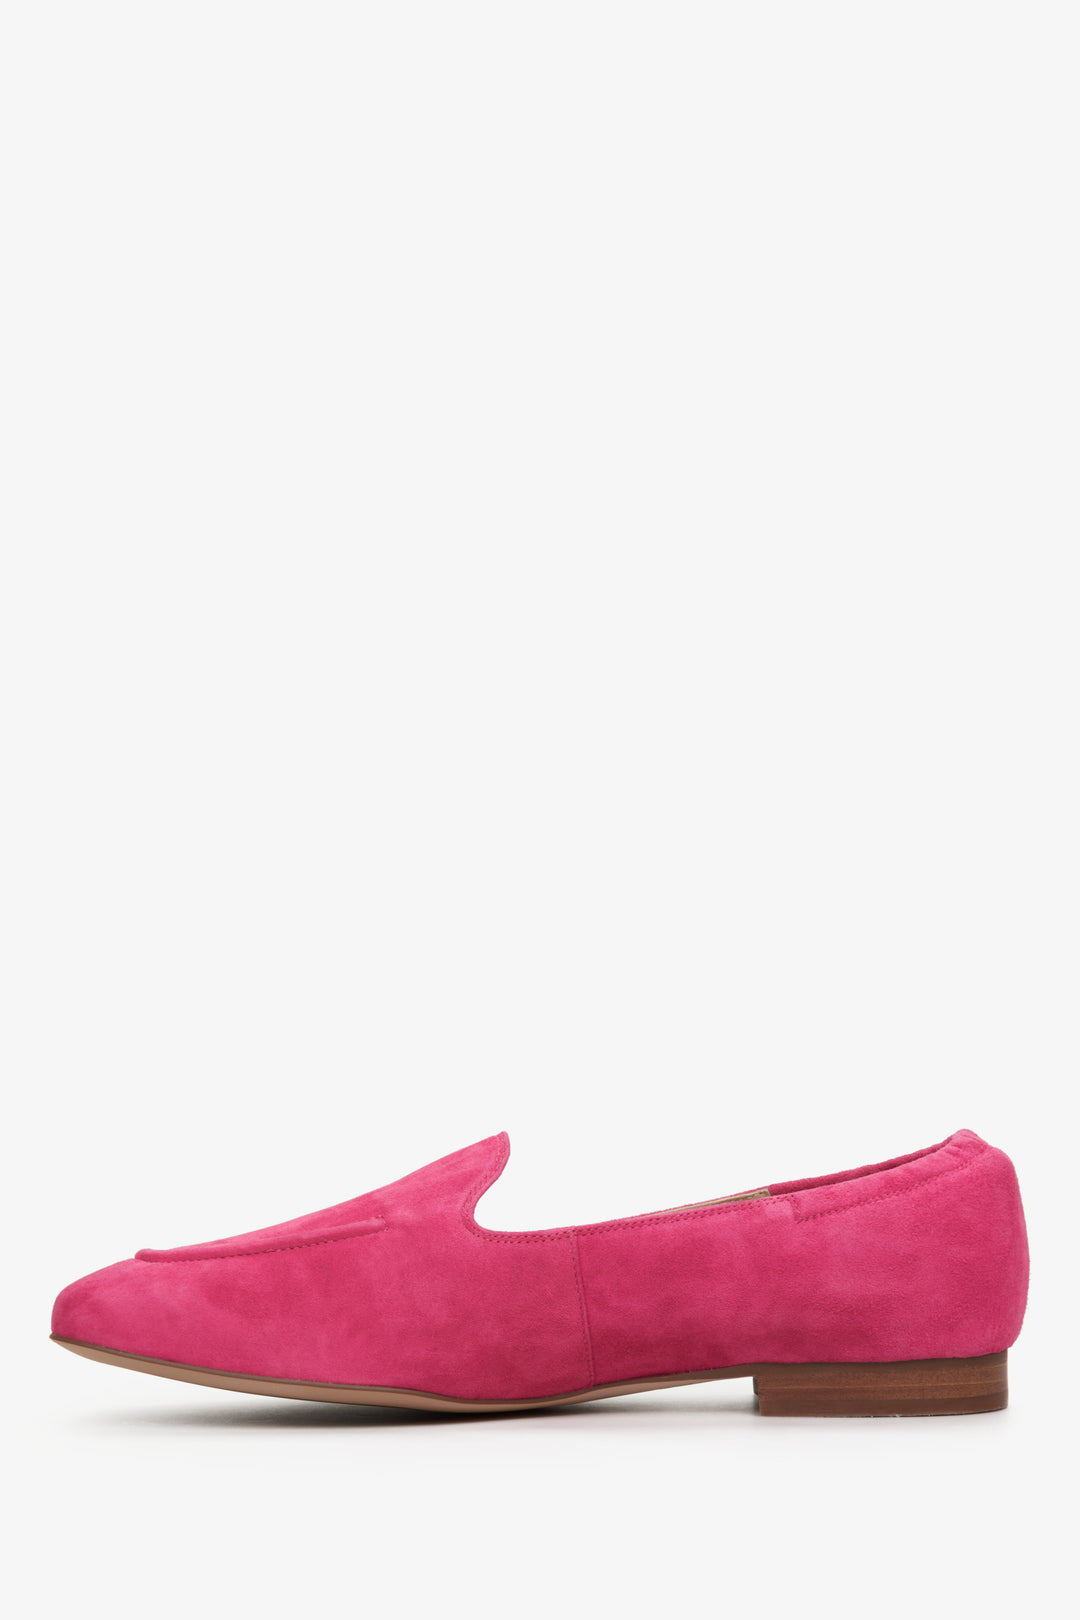 Women's fuchsia Estro moccasins made of genuine velour for spring and fall - shoe profile.